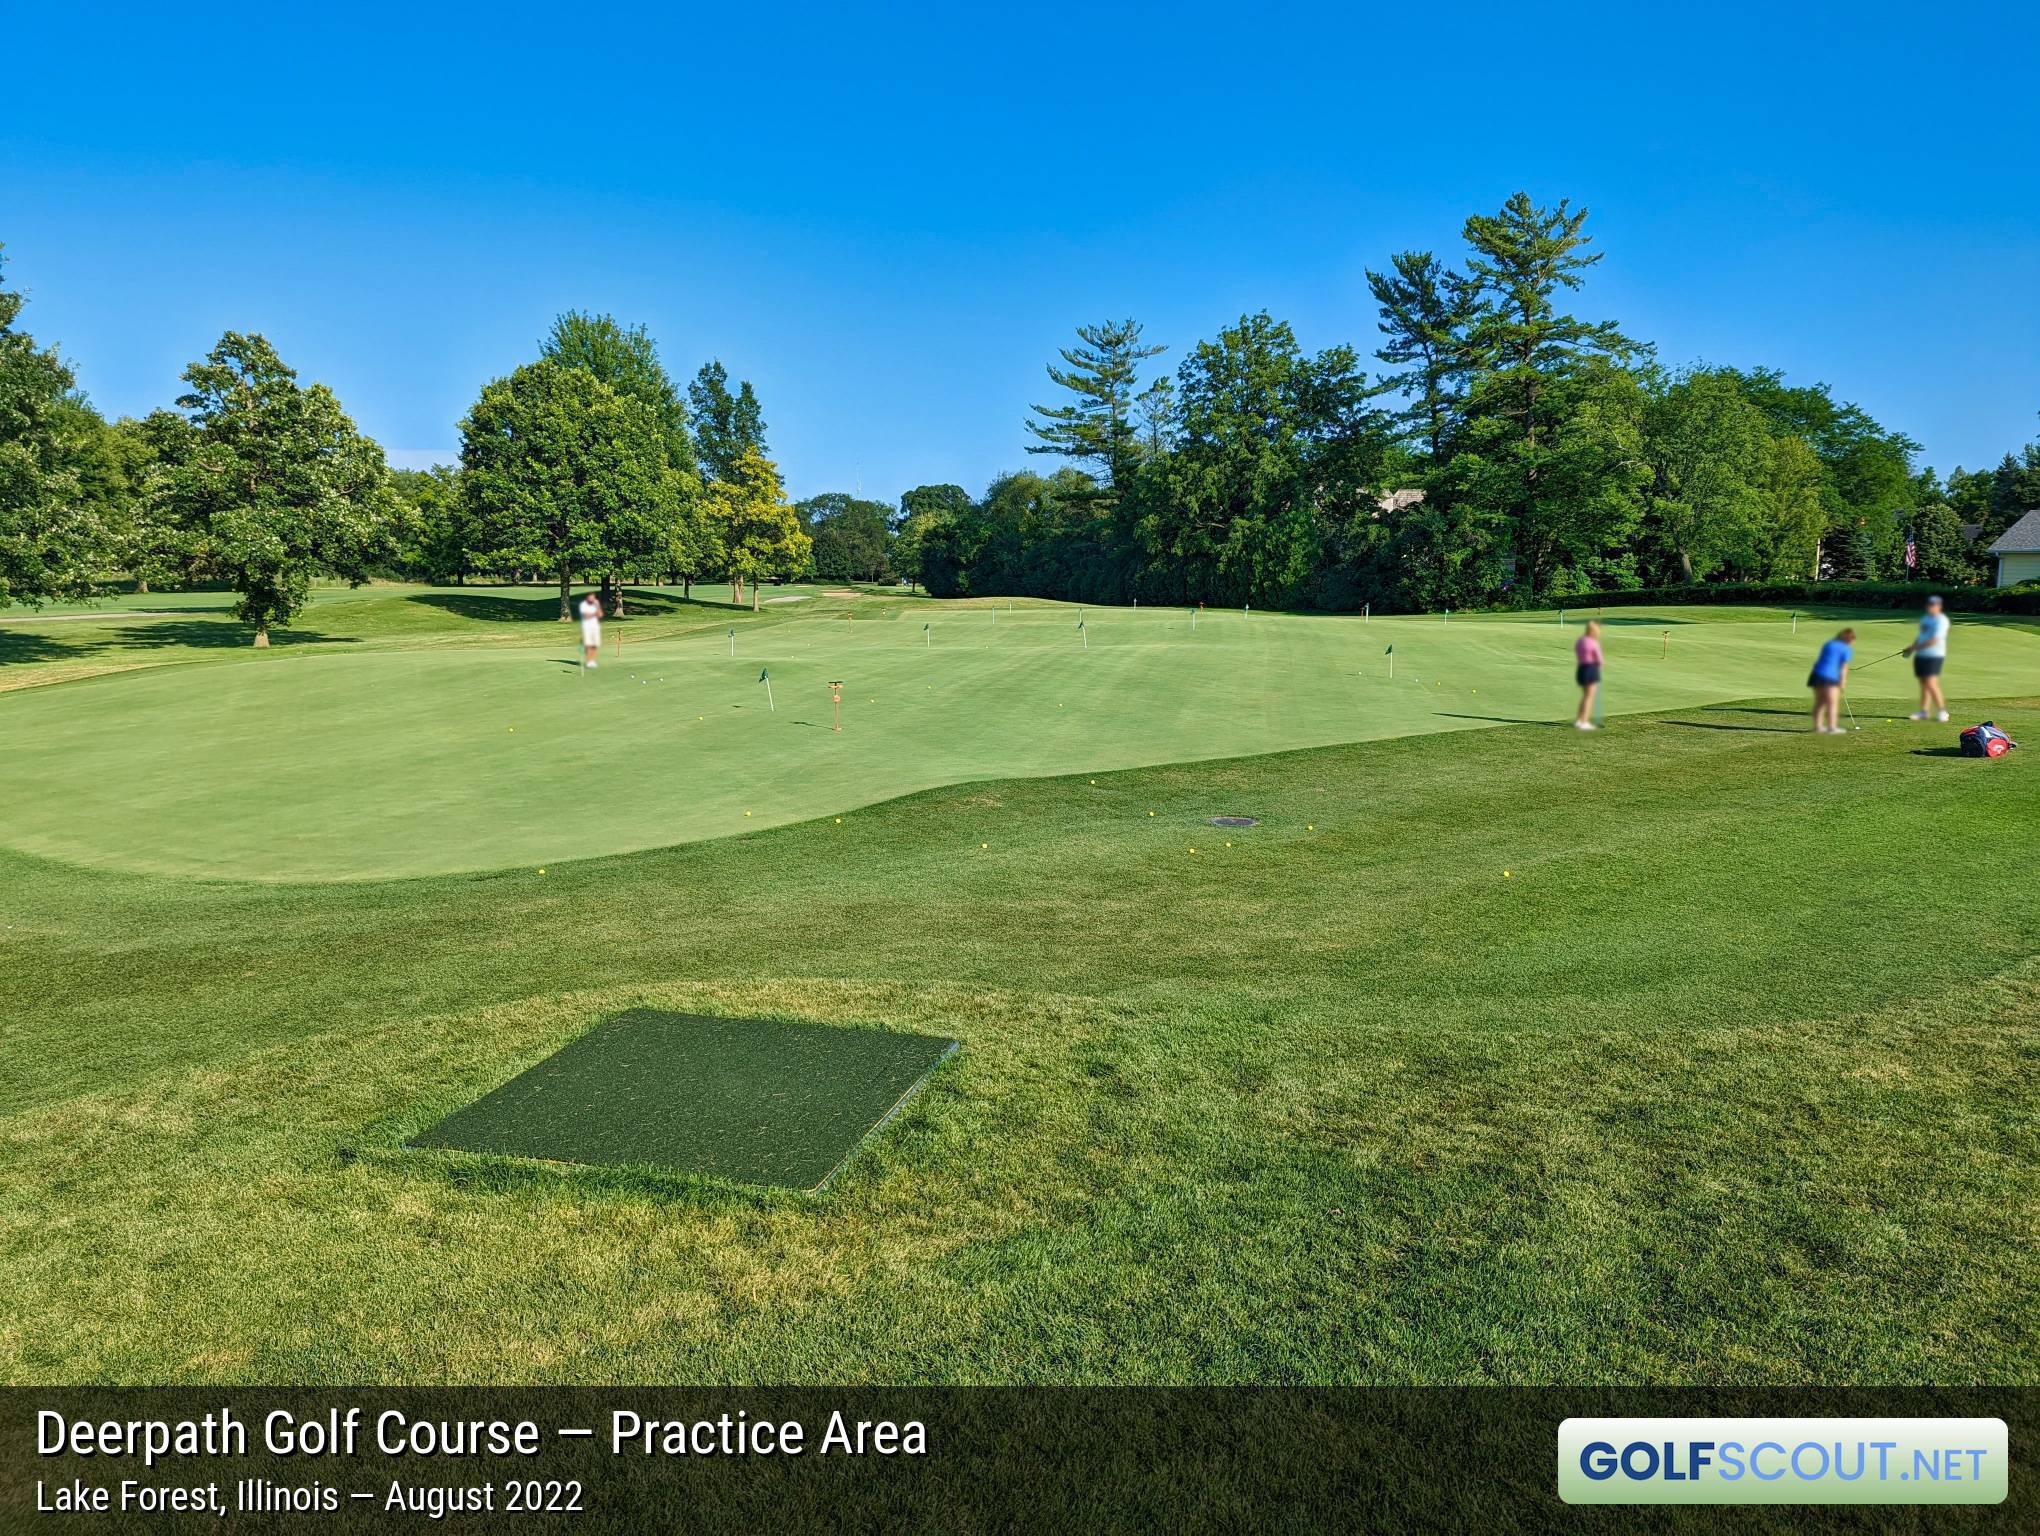 Photo of the practice area at Deerpath Golf Course in Lake Forest, Illinois. 